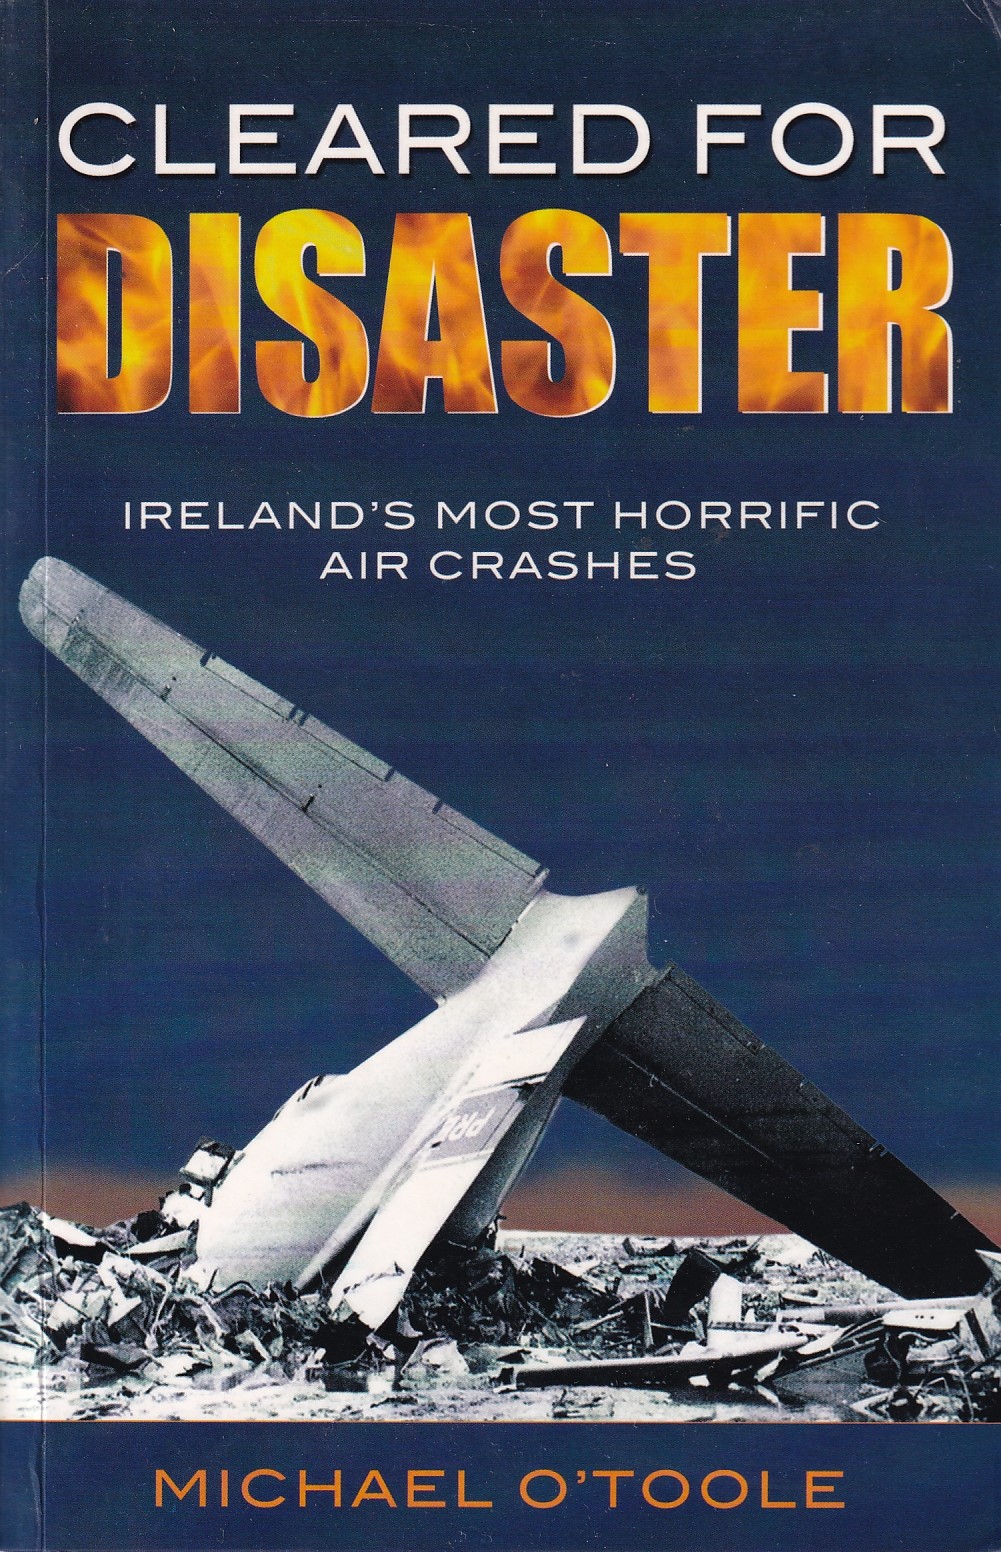 Cleared for Disaster: Ireland’s Most Horrific Air Crashes by Michael O'Toole